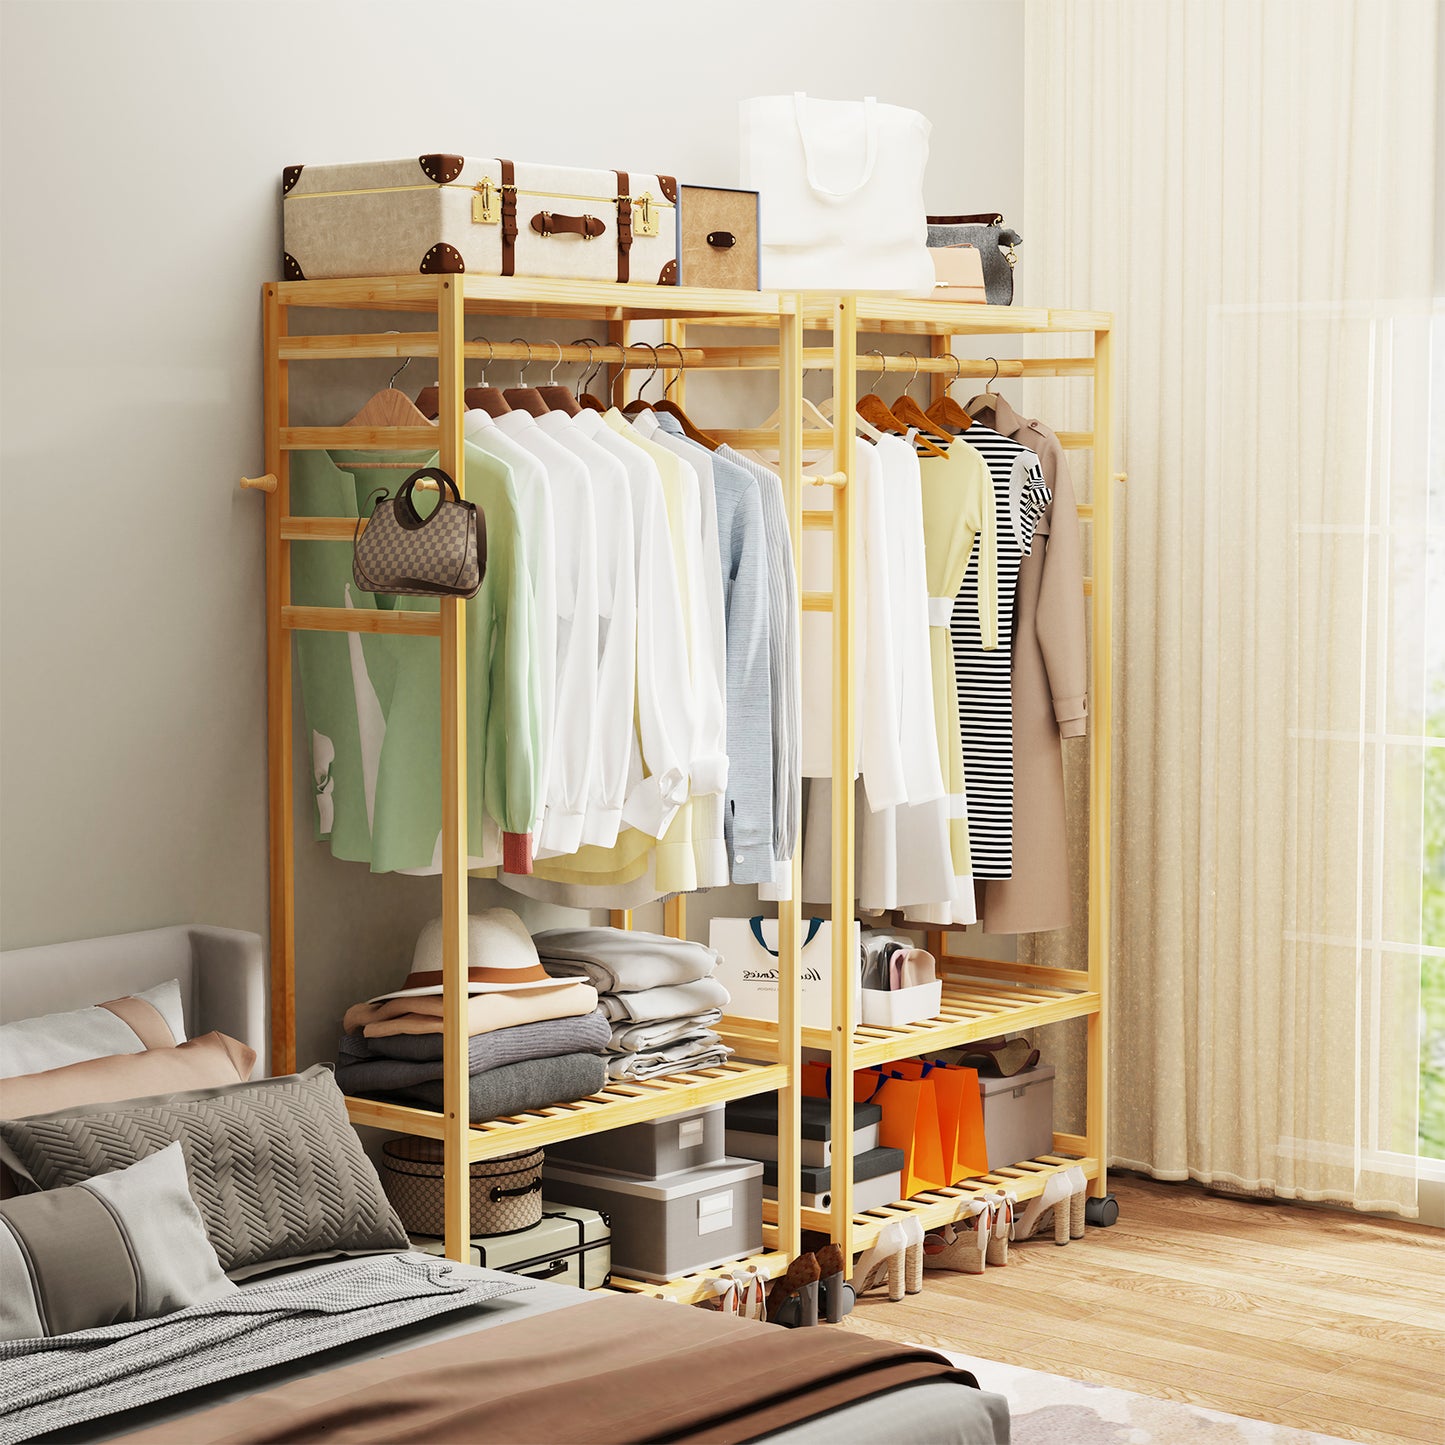 clothes stand in the bedroom